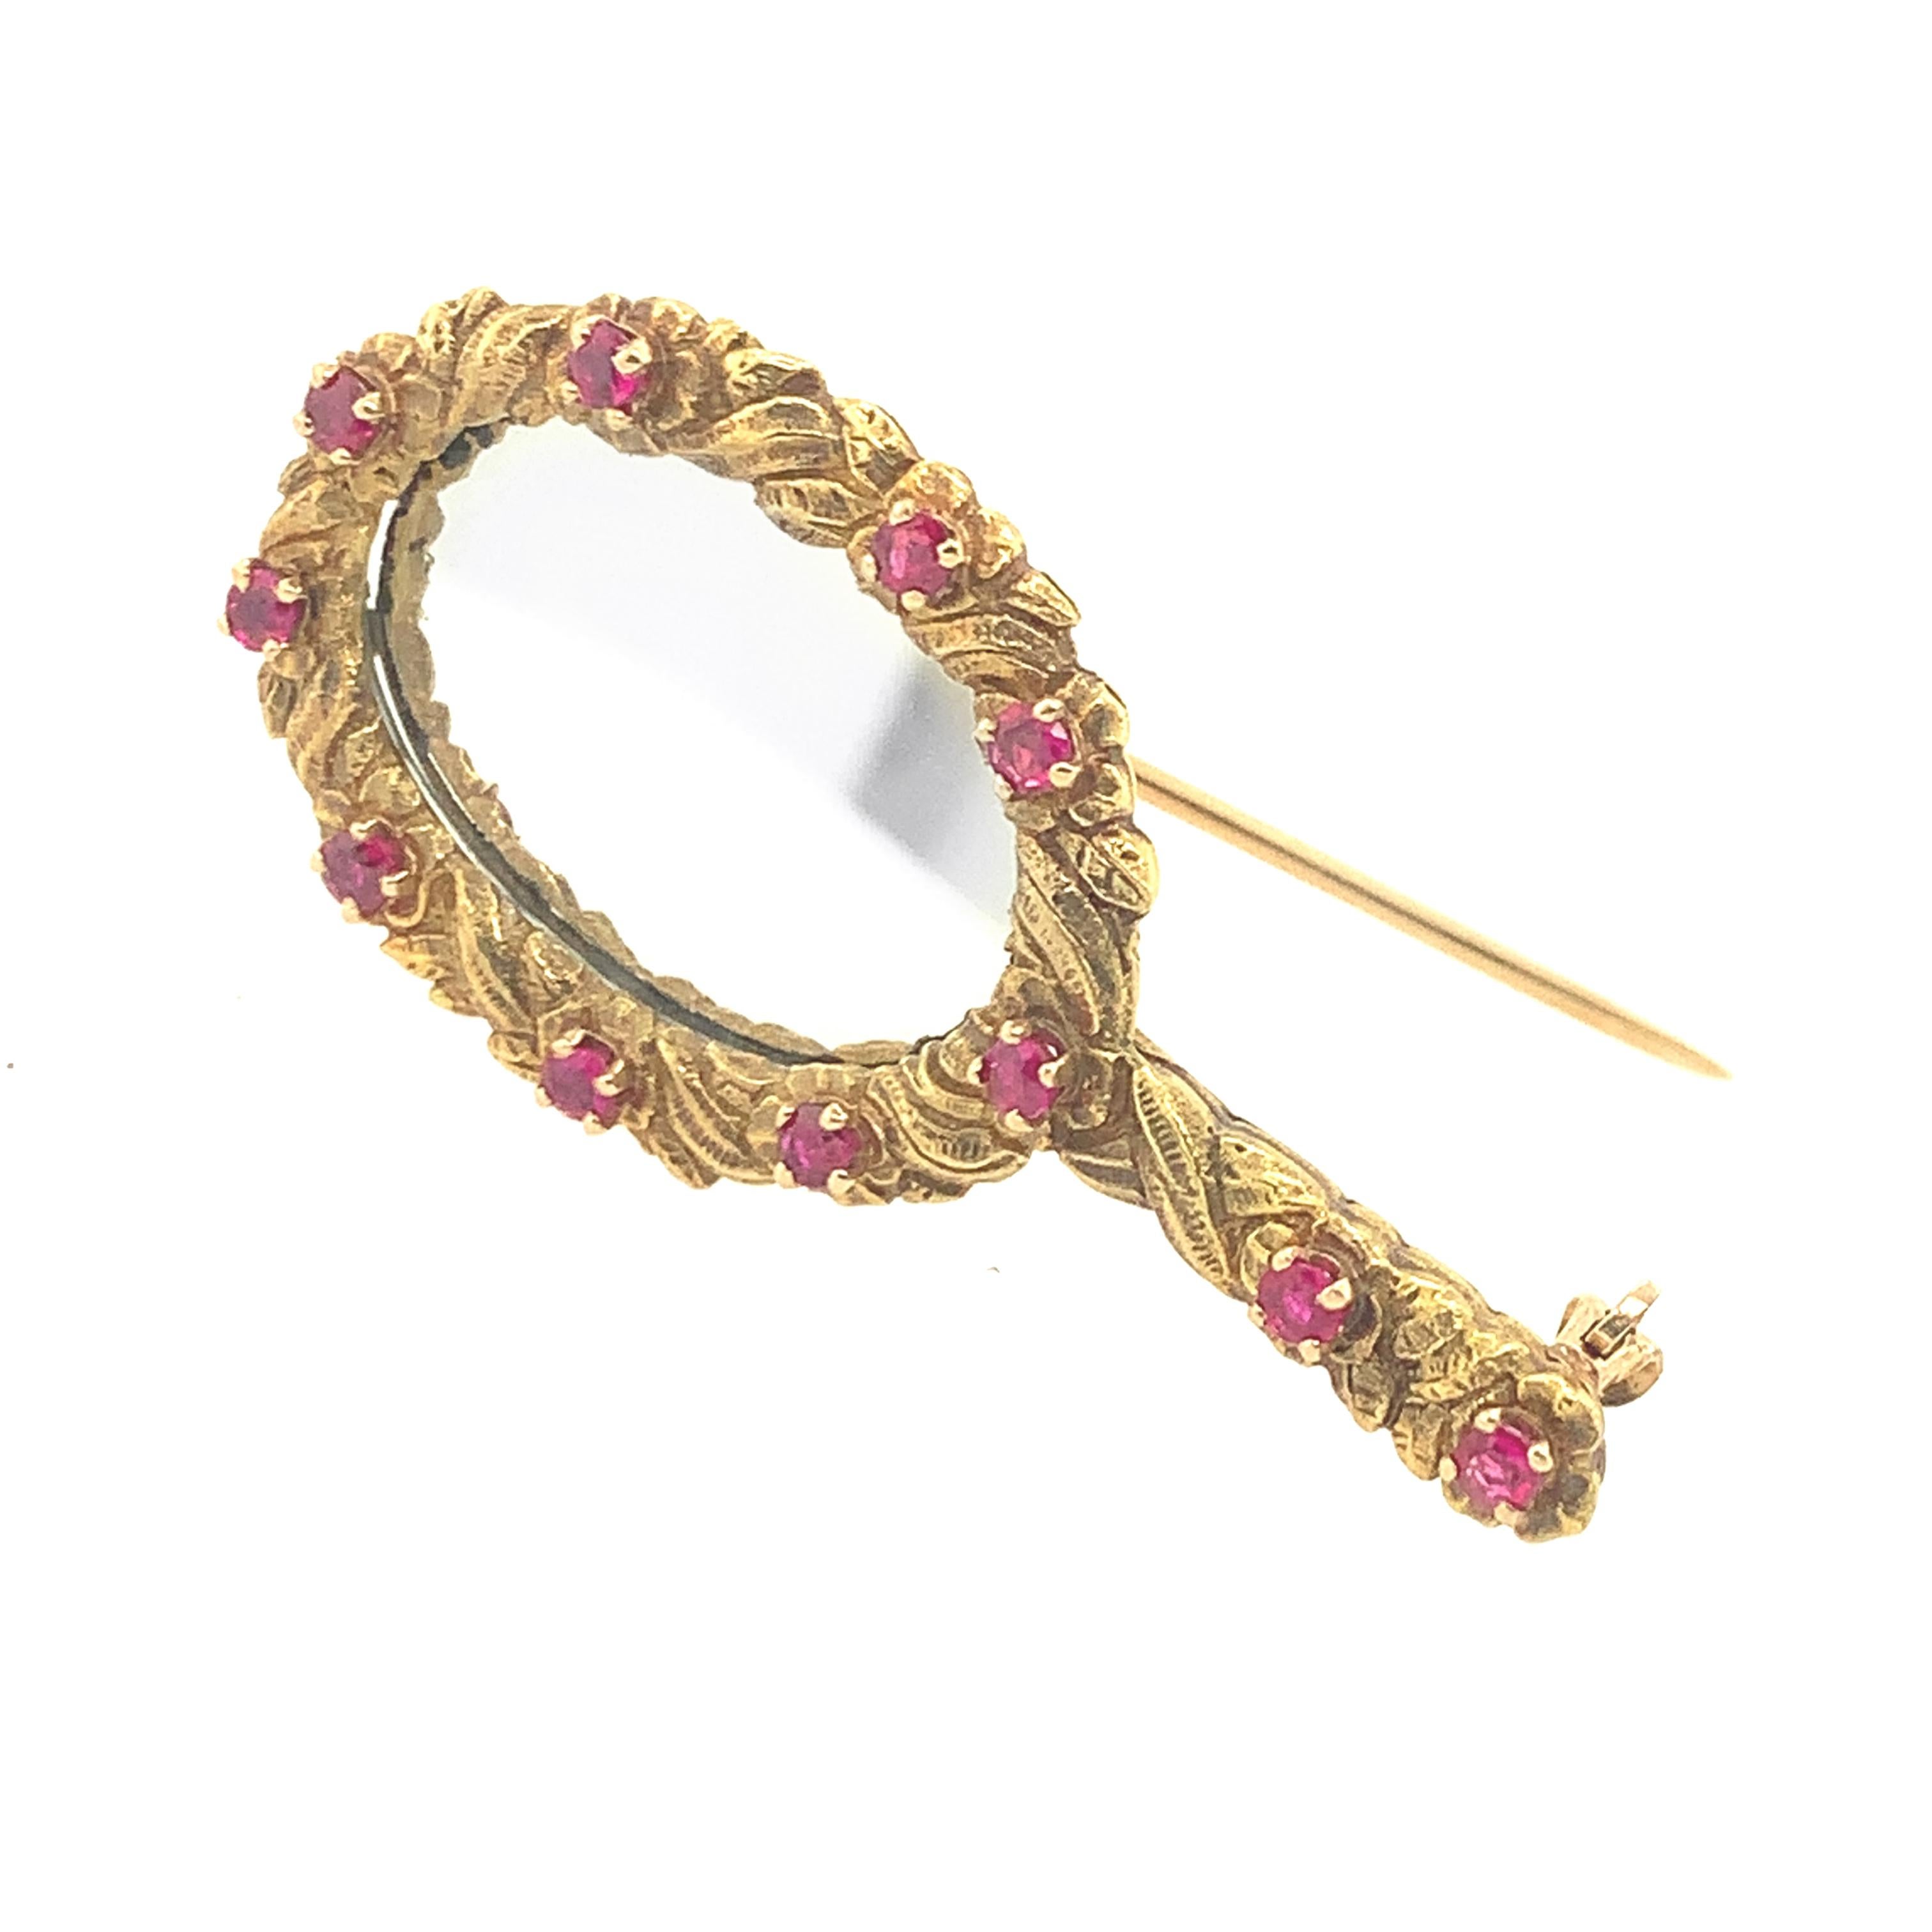 A fabulous figural mirror pin: beautifully hand-crafted with a central reflective mirror surrounded by an engraved garland of figural flowers accentuated with 11 sparkling round brilliant rubies.  14K yellow gold.  Perfect for day to dress. 